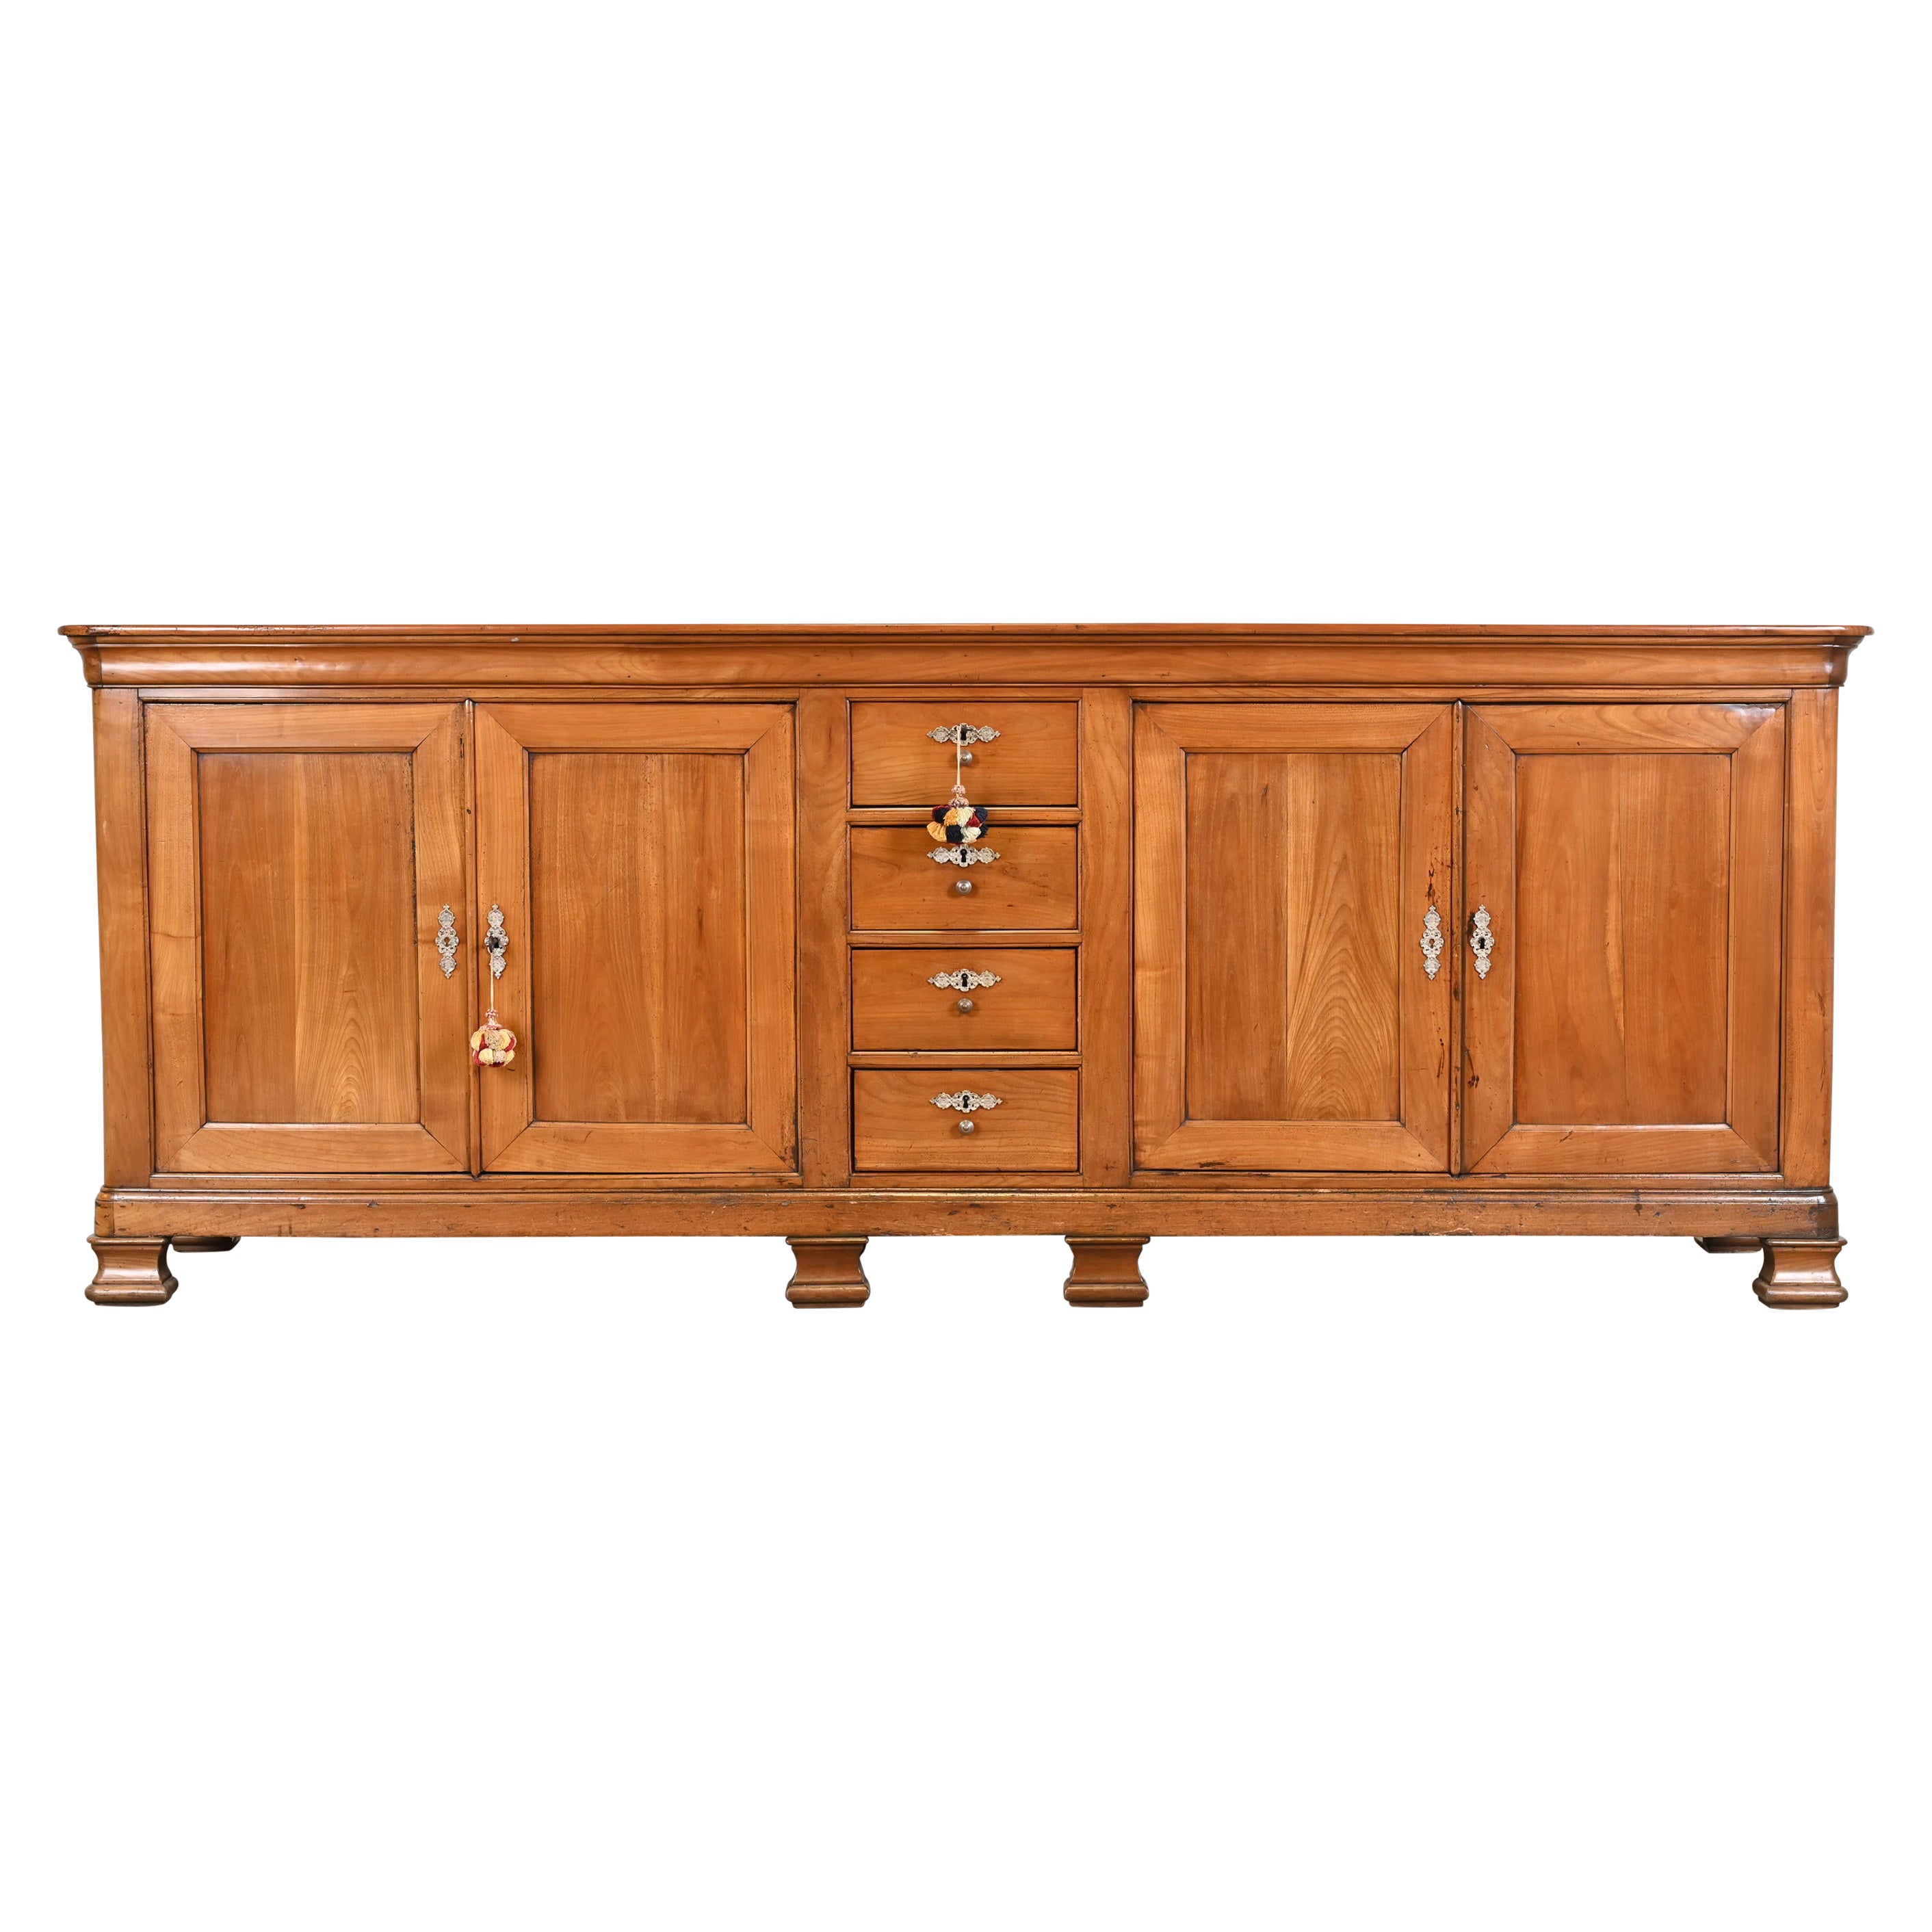 Antique Monumental French Provincial Walnut Sideboard or Bar Cabinet